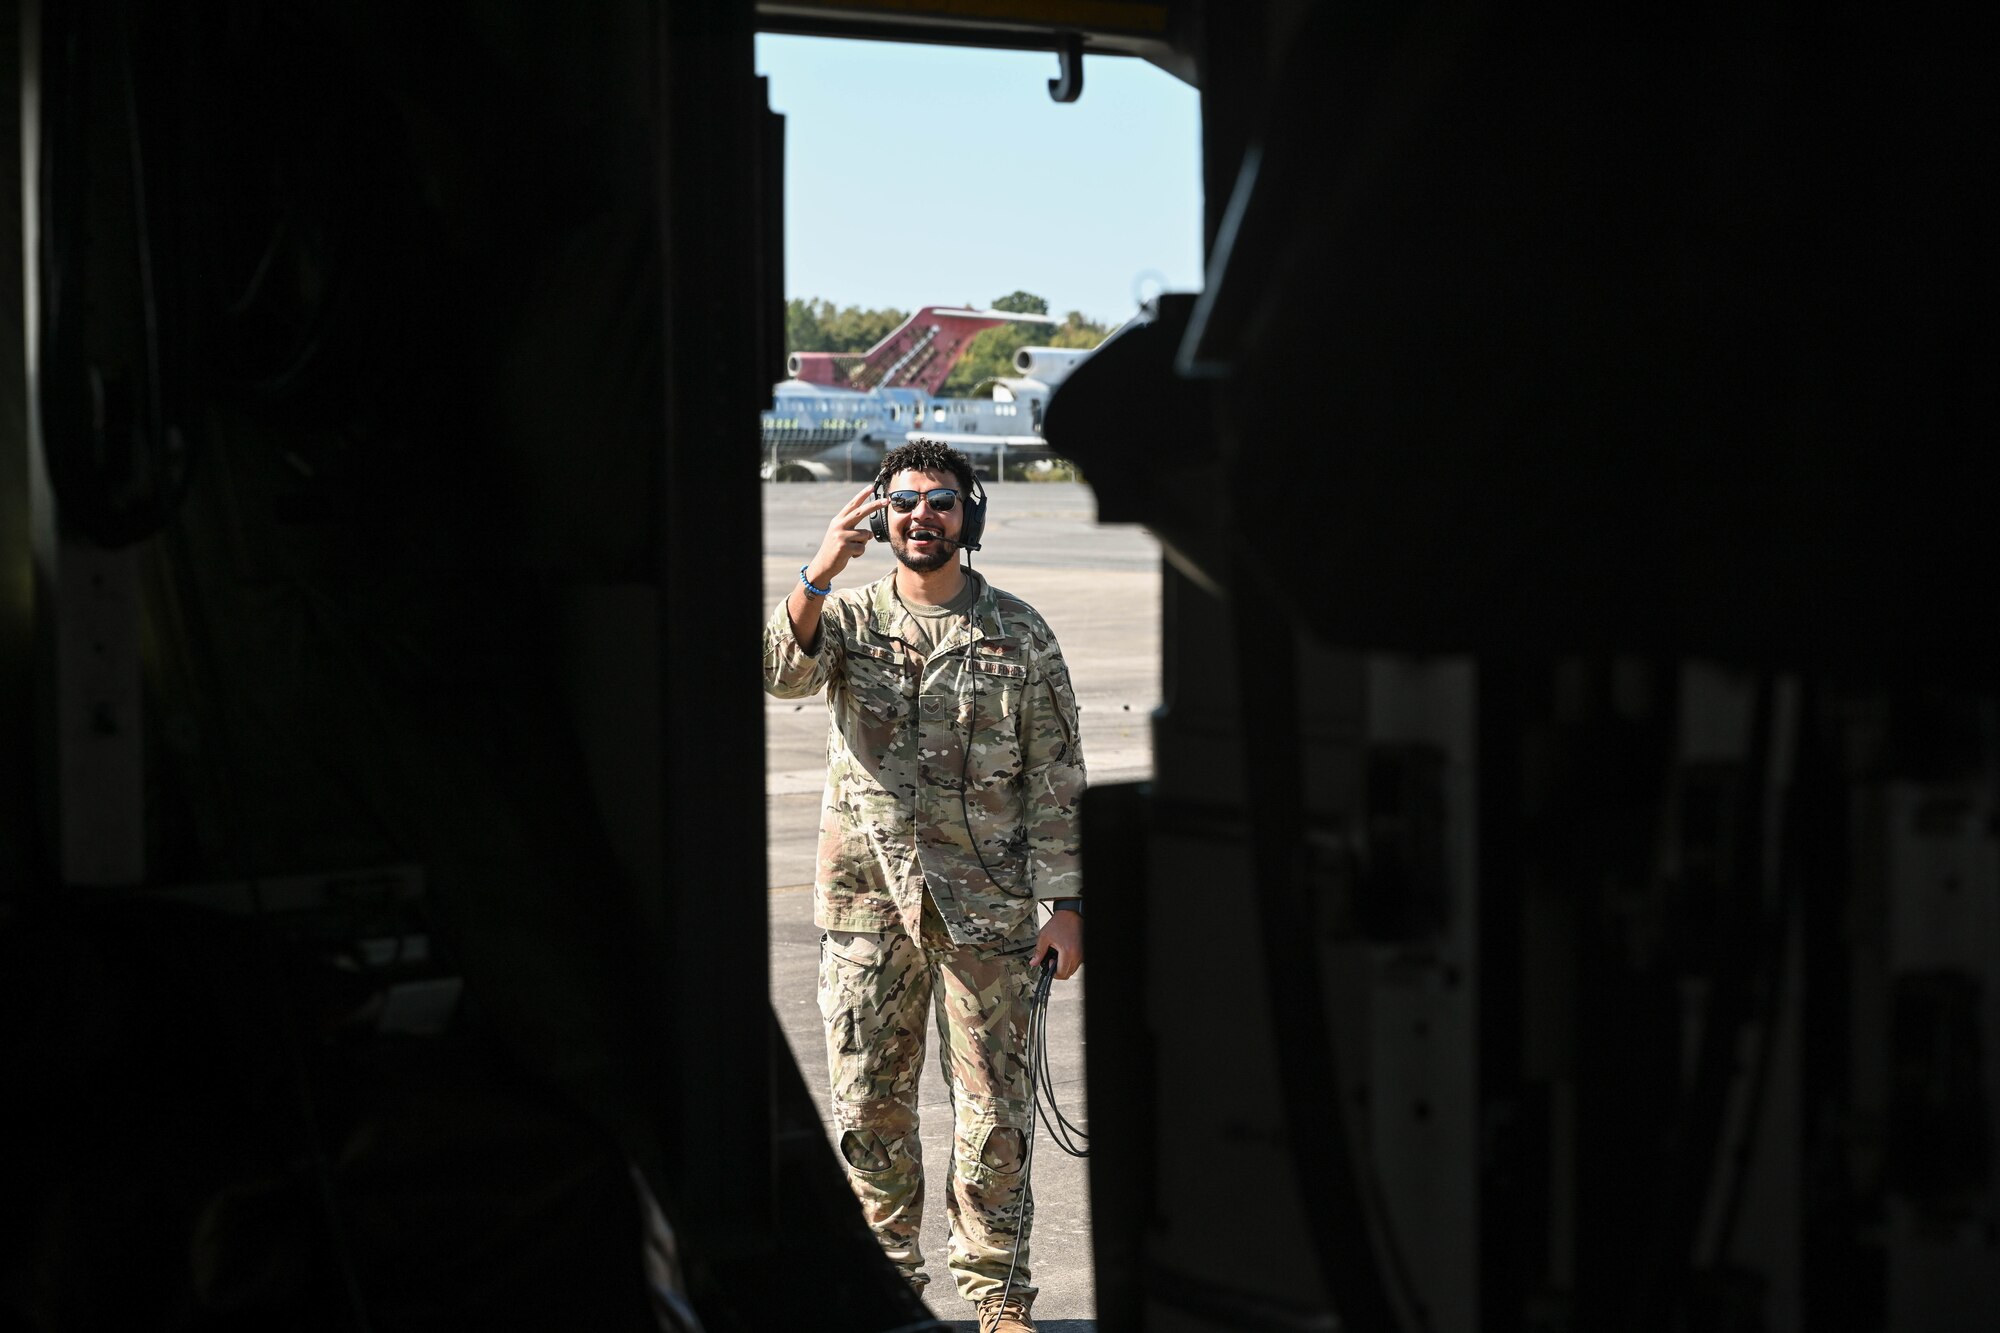 An Airman stands in a doorway.